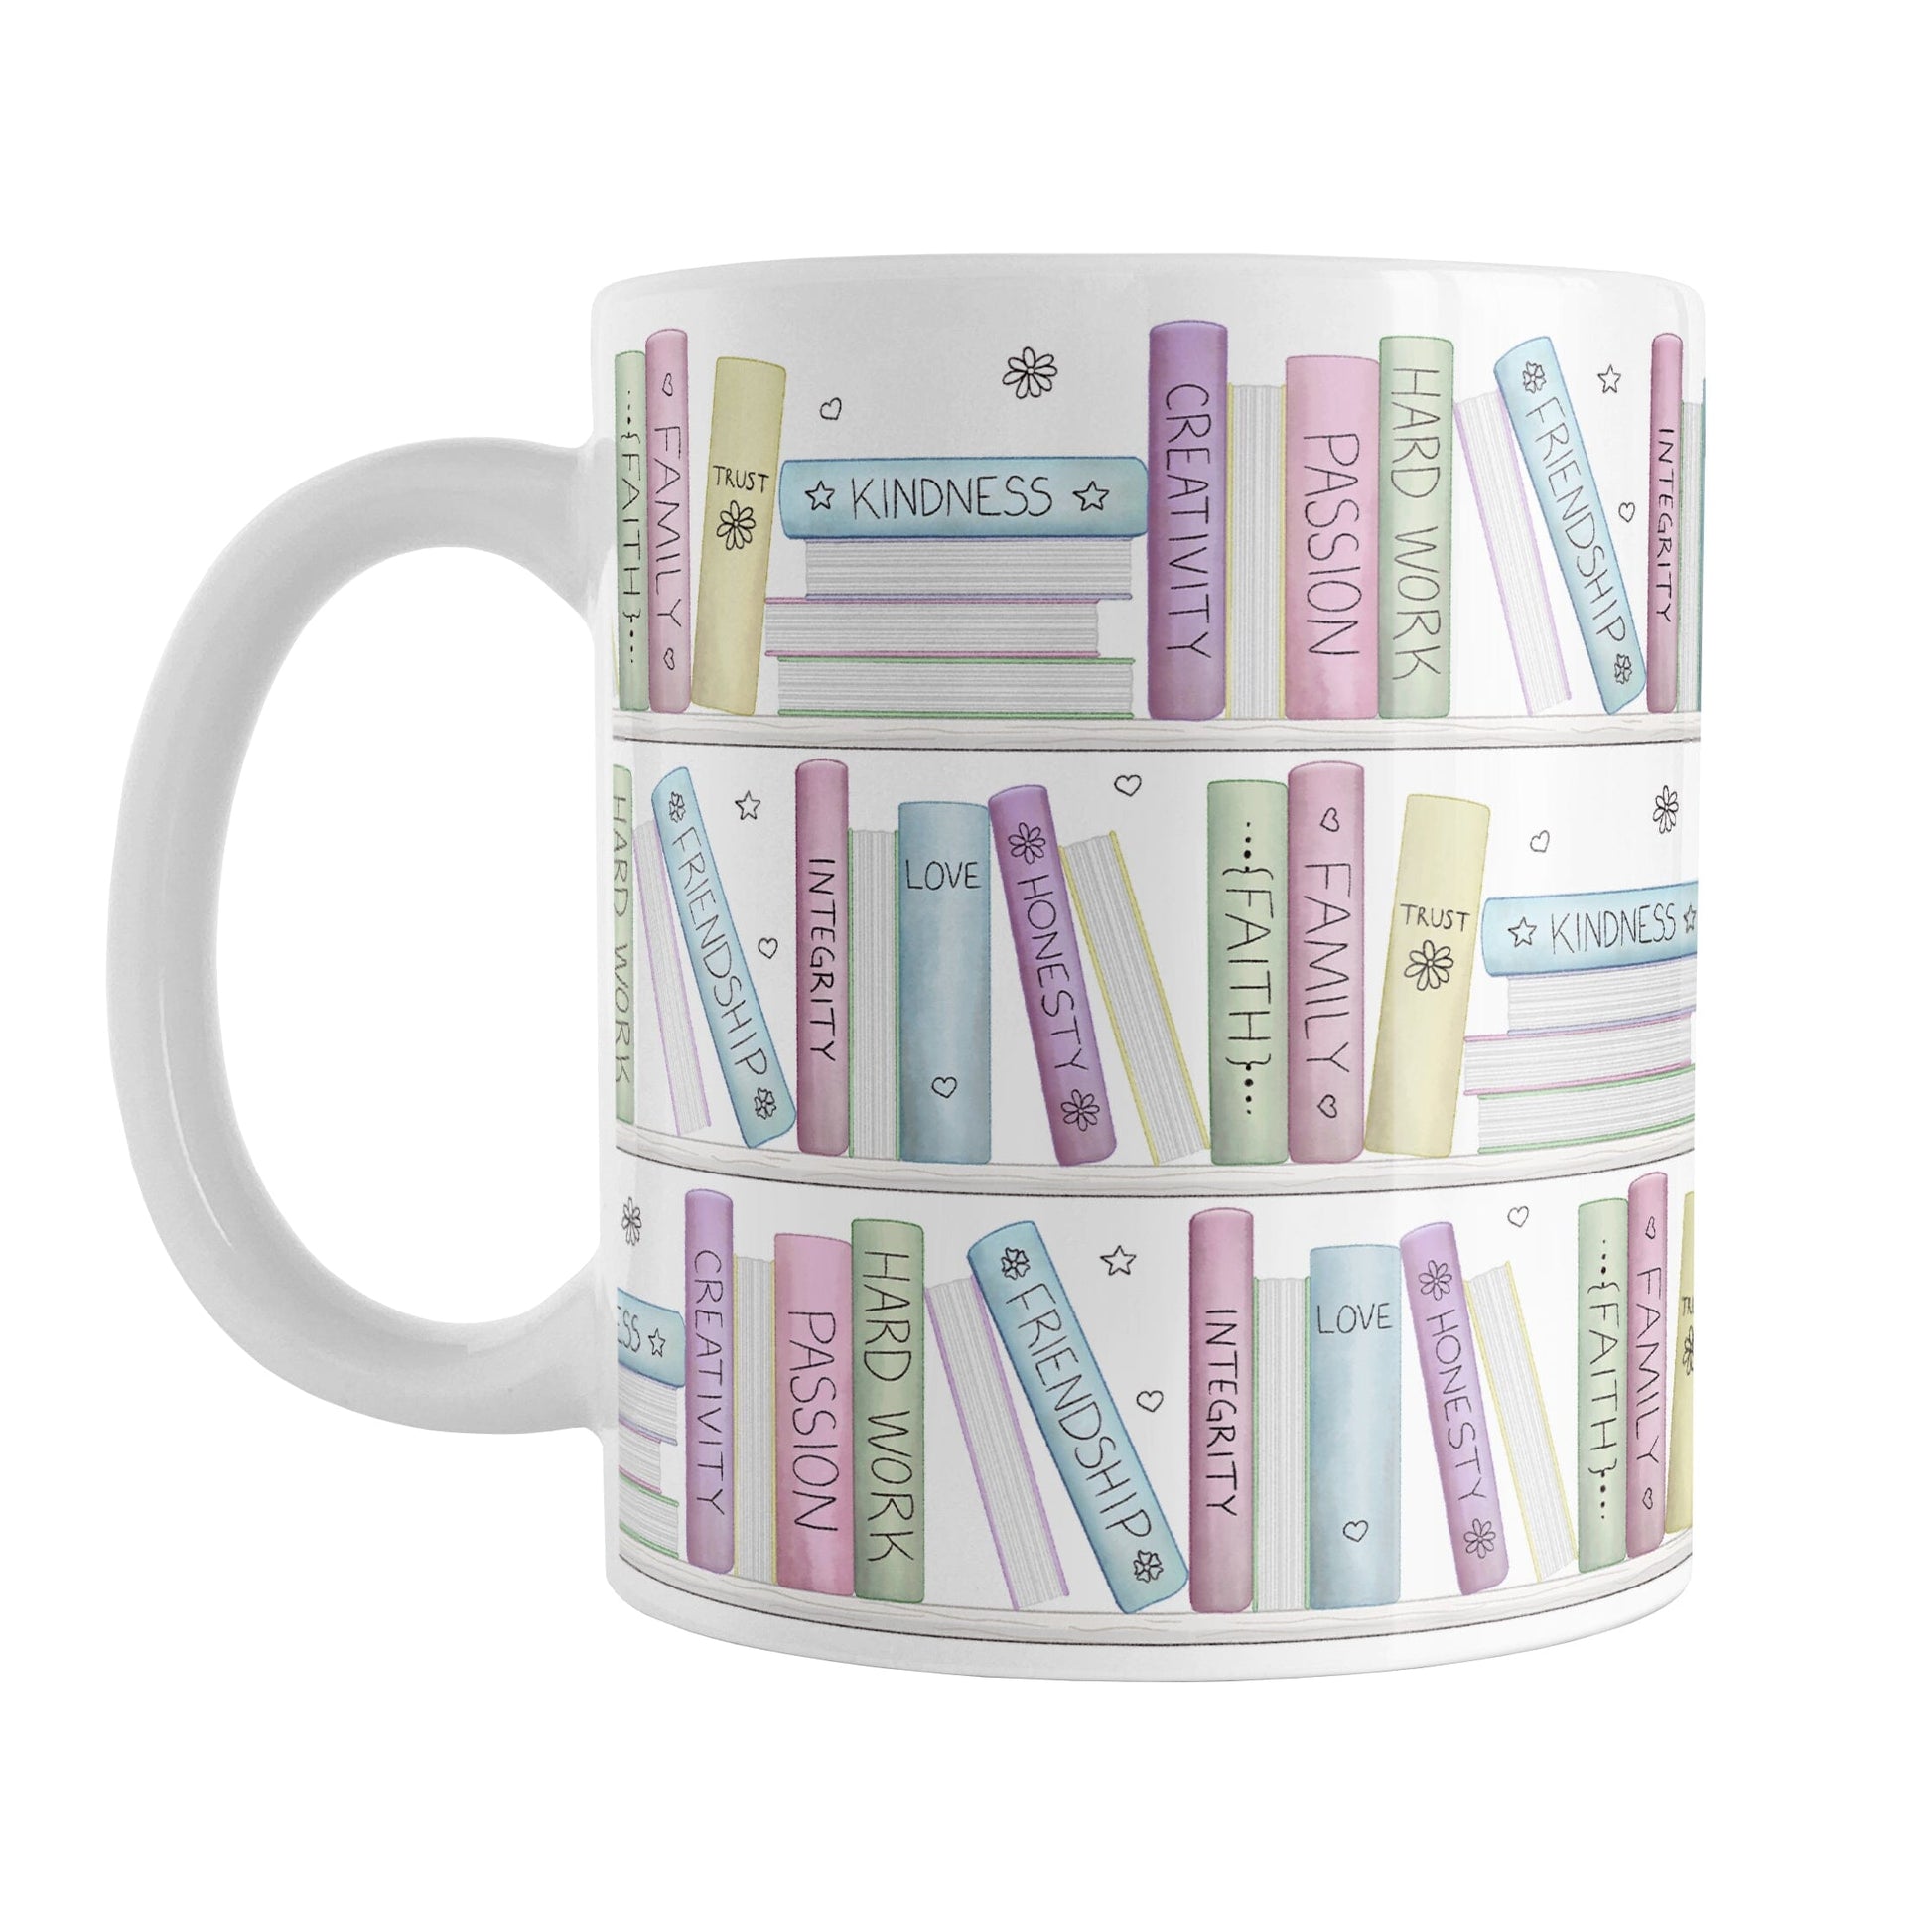 The Building Books of Life Mug (11oz) at Amy's Coffee Mugs. A ceramic coffee mug designed with a colorful pattern of books on a bookshelf each with an inspirational title that all could be considered important building blocks of life, such as love, family, integrity, kindness, passion, faith, creativity, and more. 